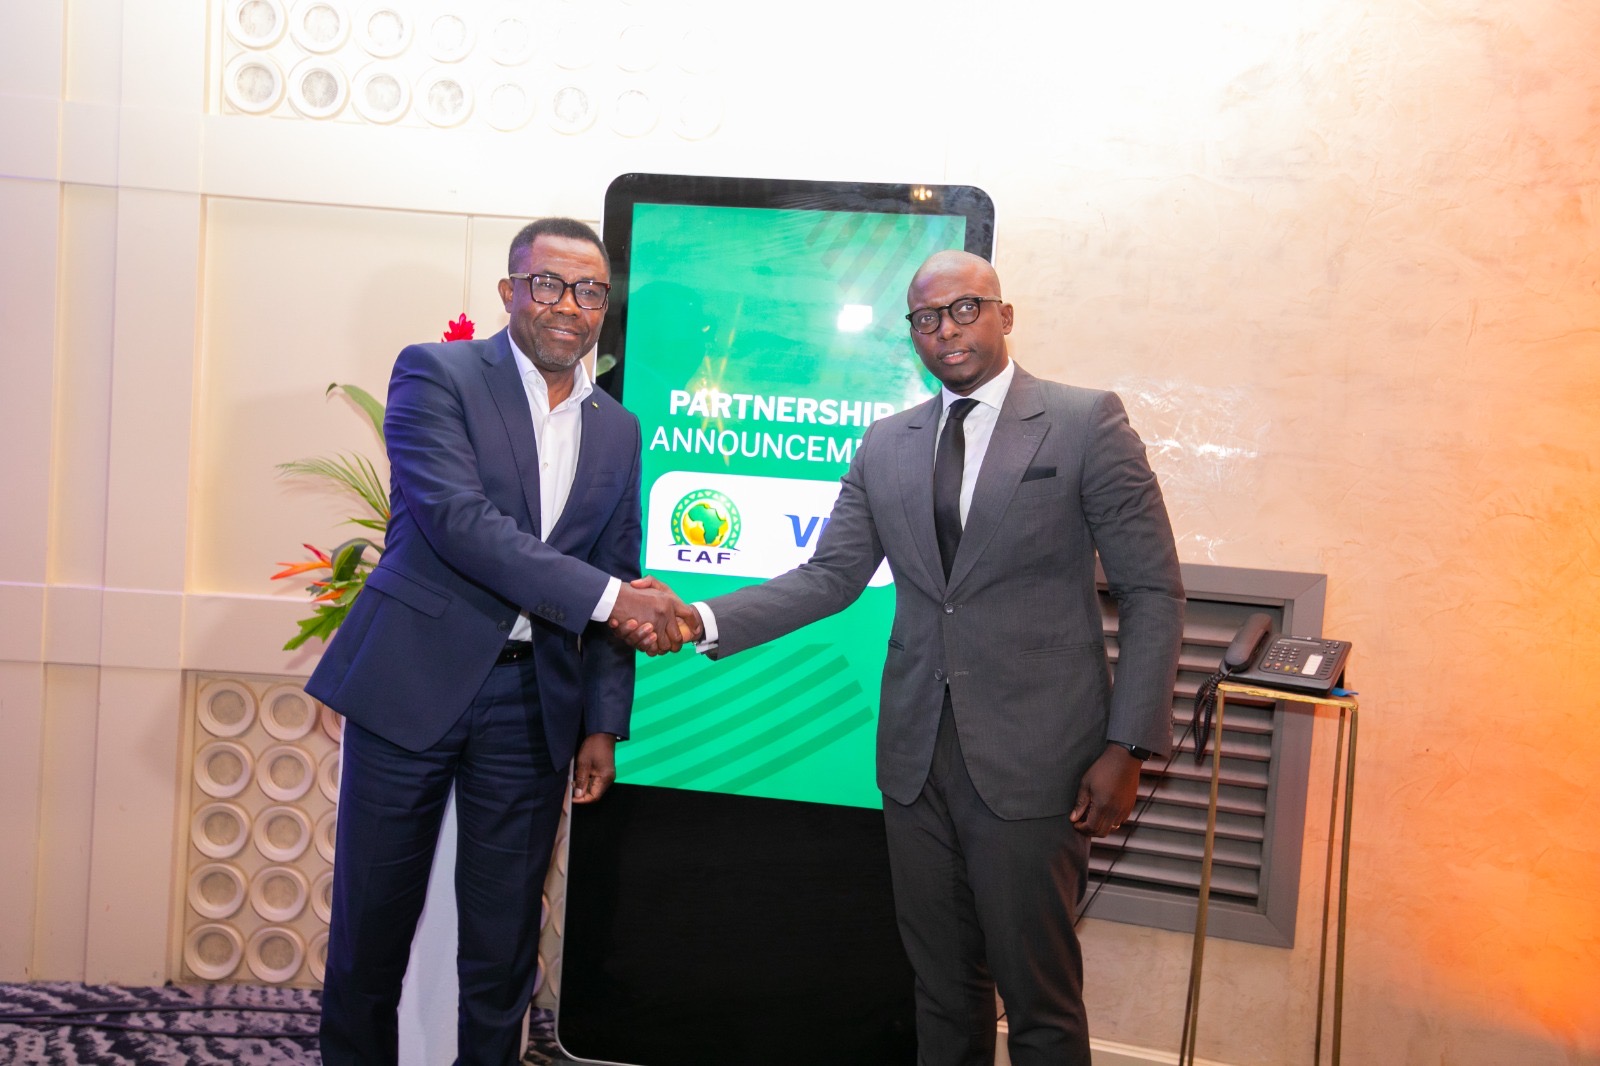 Ismahill Diaby, Vice President, Cluster Country Manager, Visa Western and Central Africa (Right) and Véron Mosengo-Omba, General Secretary of Confederation of African Football (CAF) during the signing ceremony in Abidjan